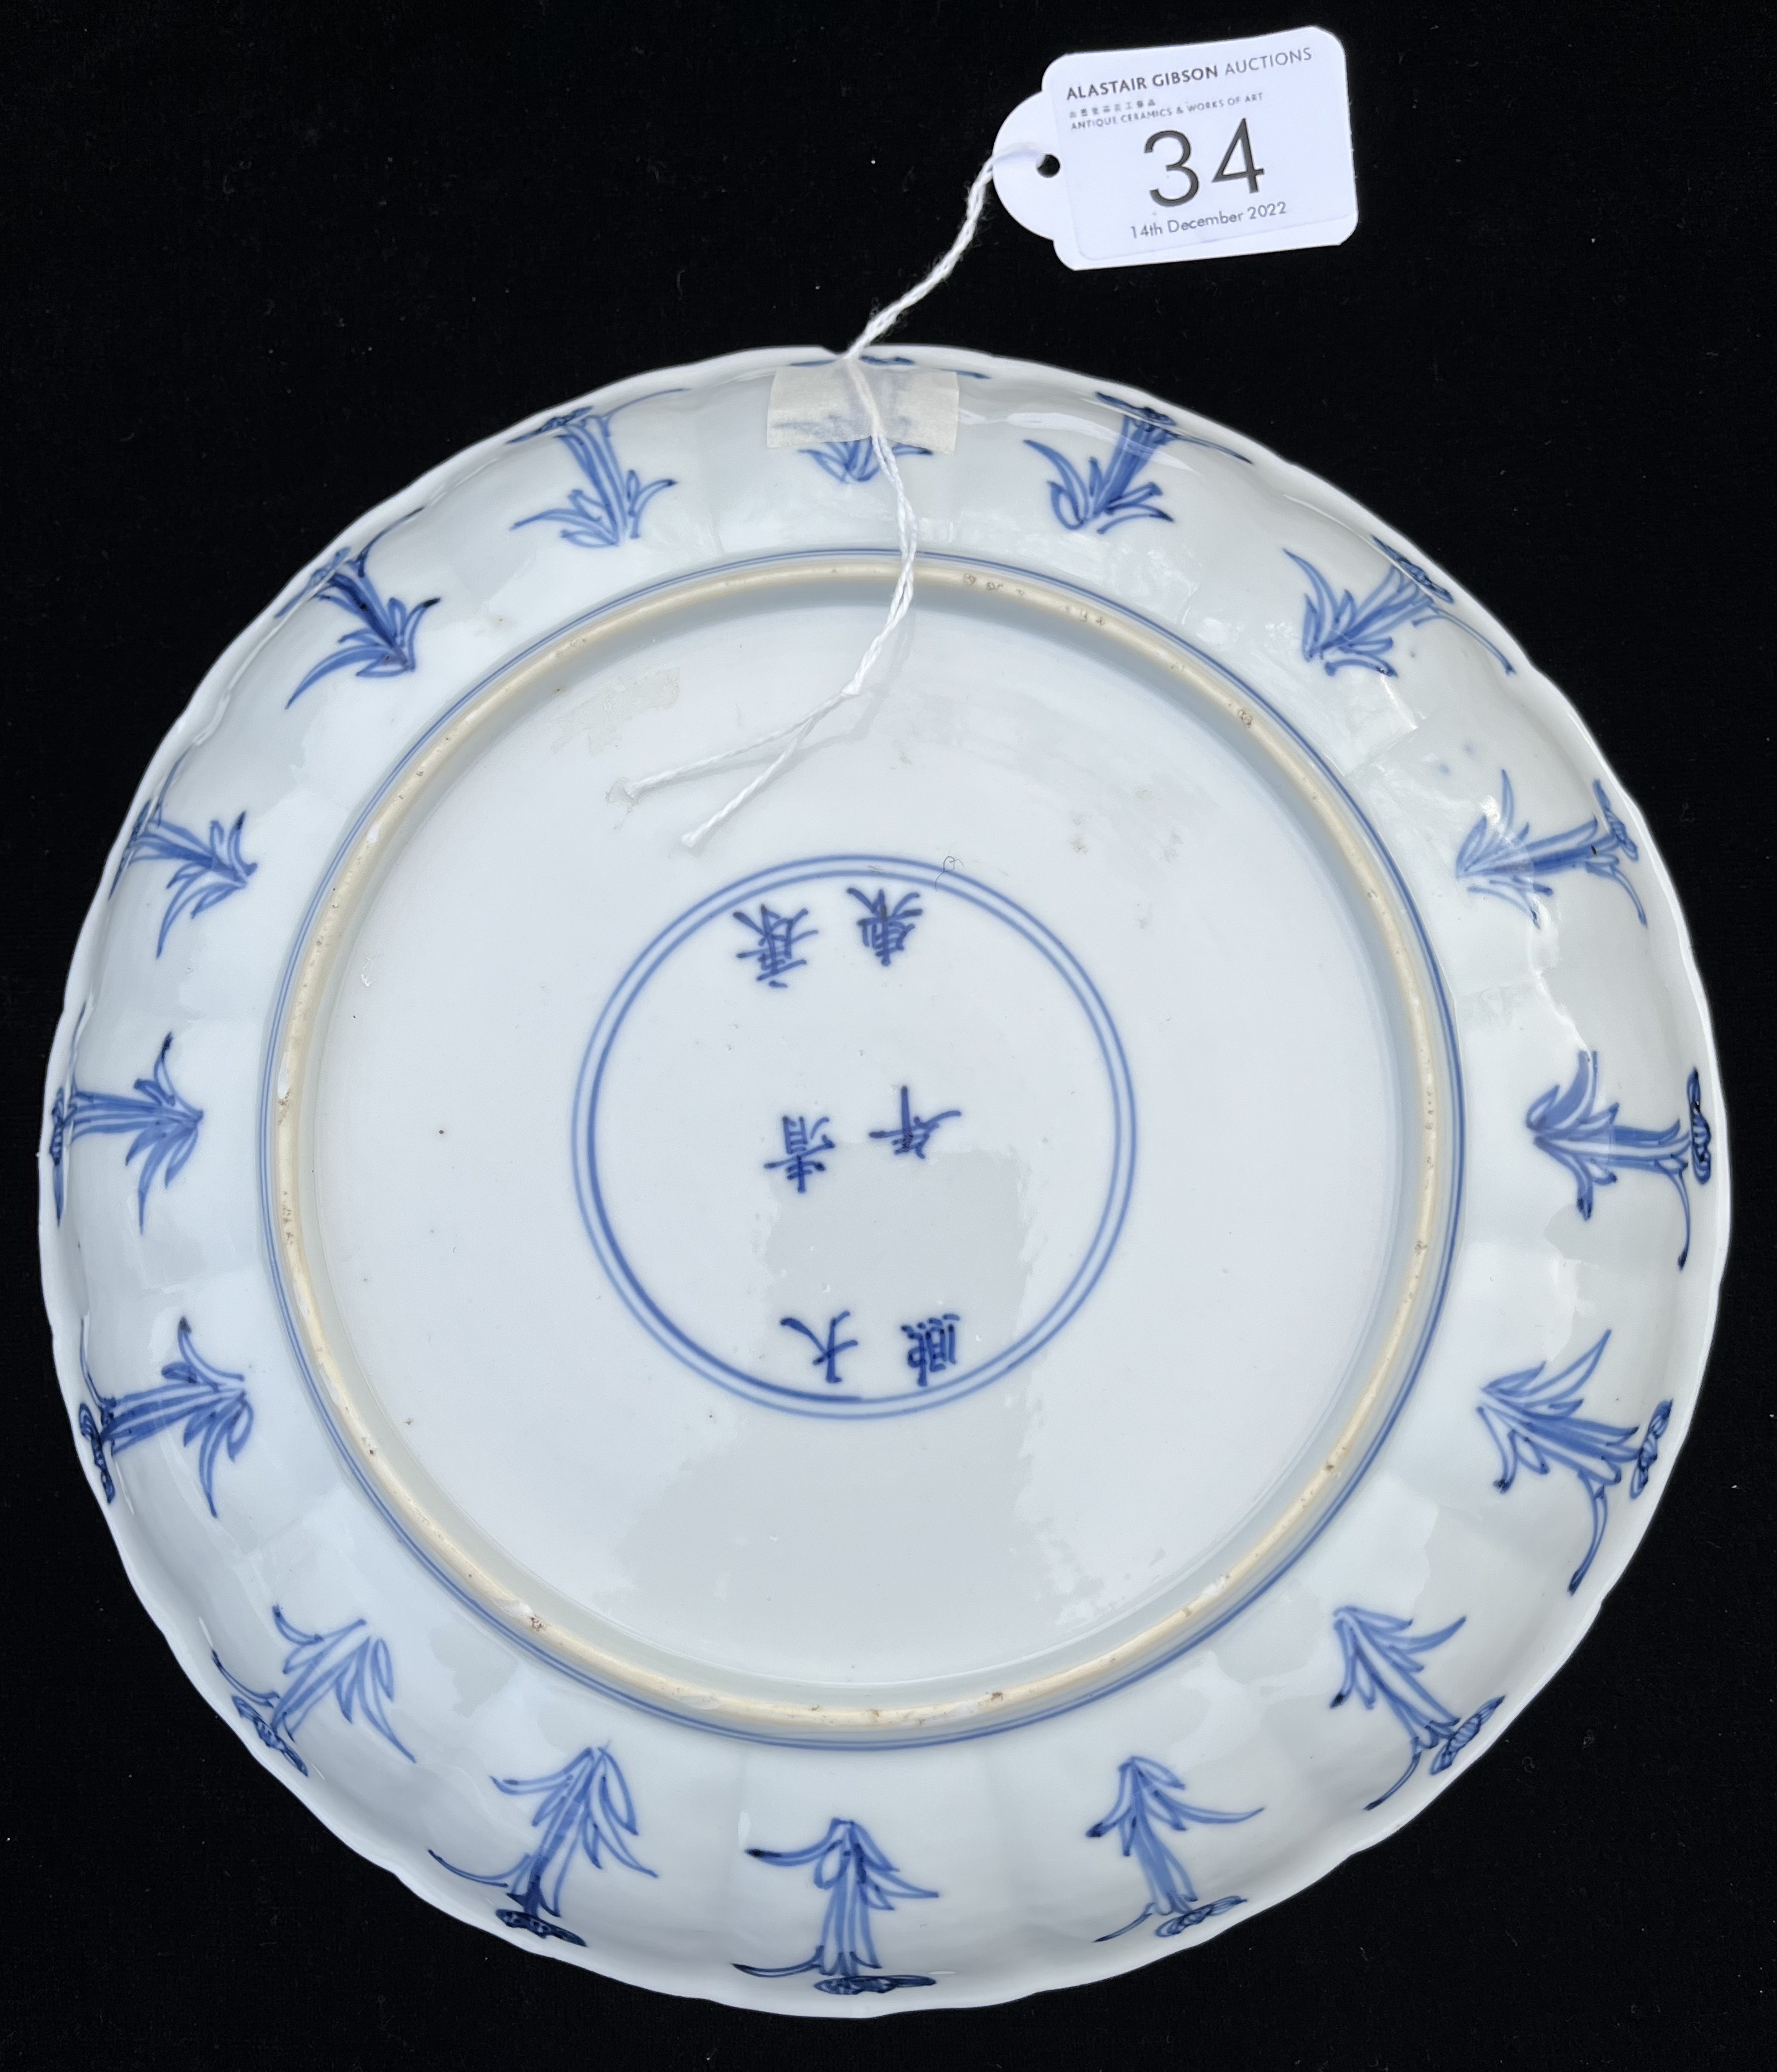 A CHINESE BLUE AND WHITE PORCELAIN SAUCER DISH, QING DYNASTY, KANGXI MARK AND PERIOD, 1662 – 1722 - Image 3 of 6